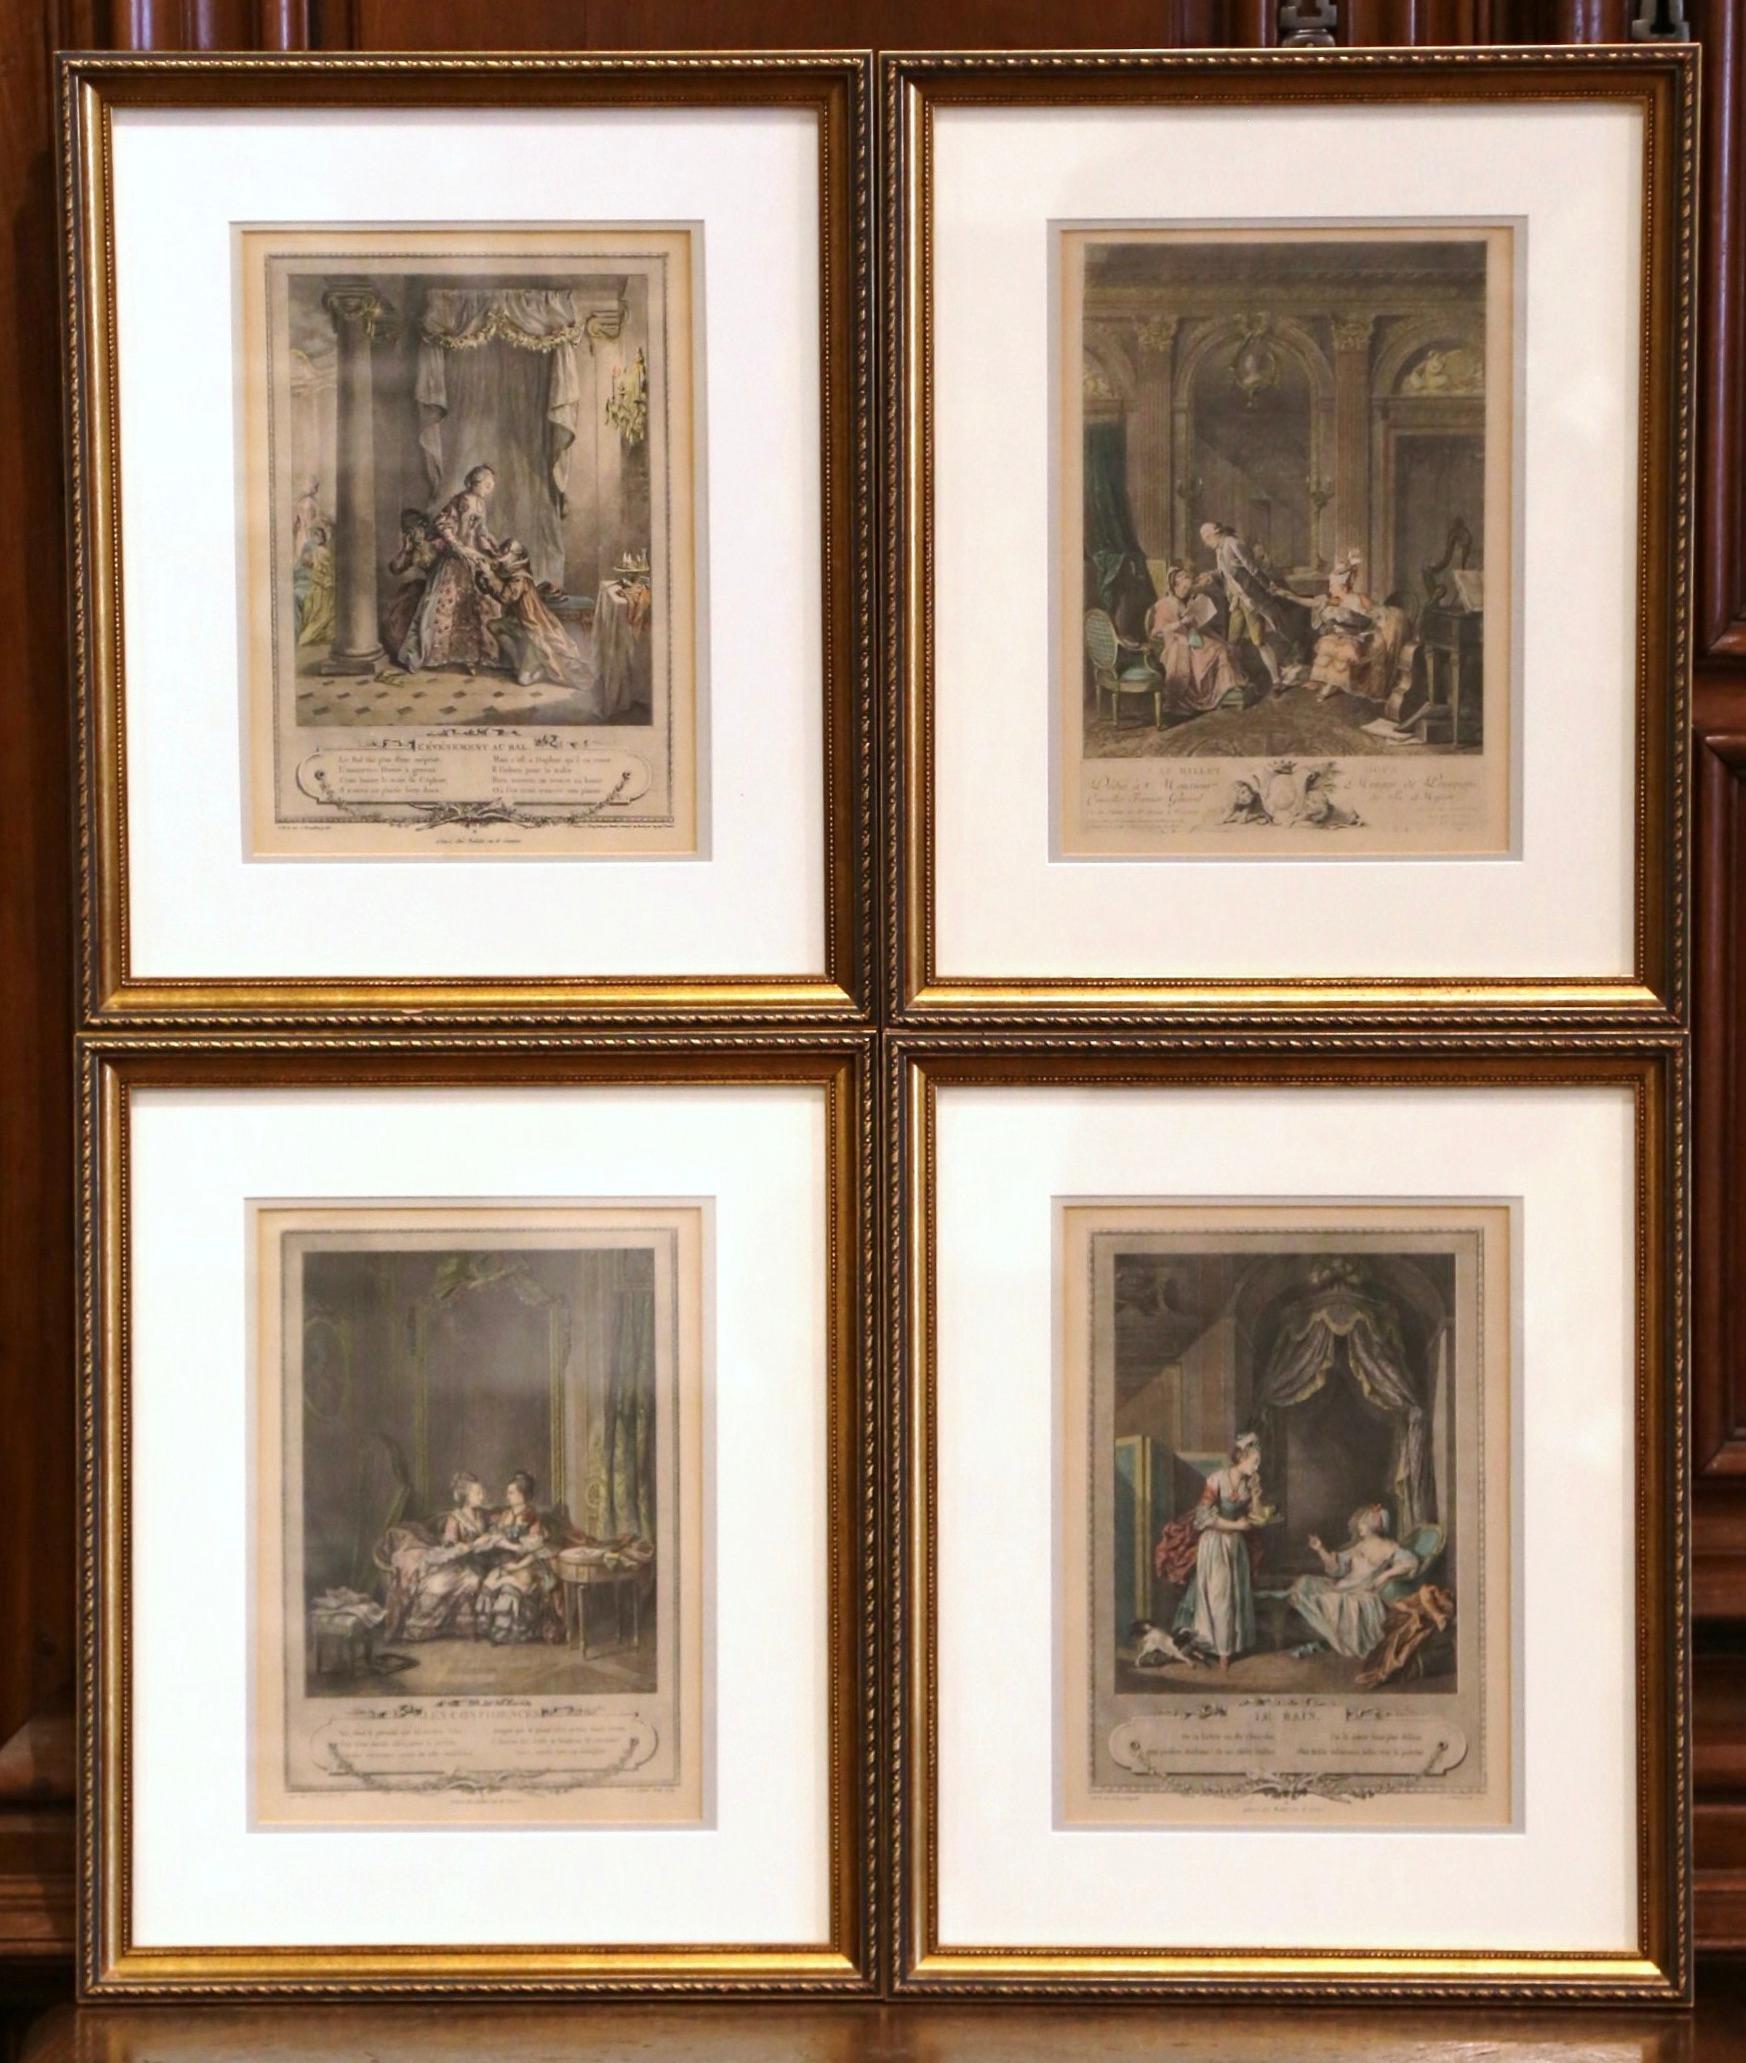 Decorate an office or a study with this elegant set of framed Louis XV antique prints. Crafted in Paris, France circa 1774 and set in a custom carved gilt frame protected with glass, each print depicts a romantic scene with people dressed in 18th